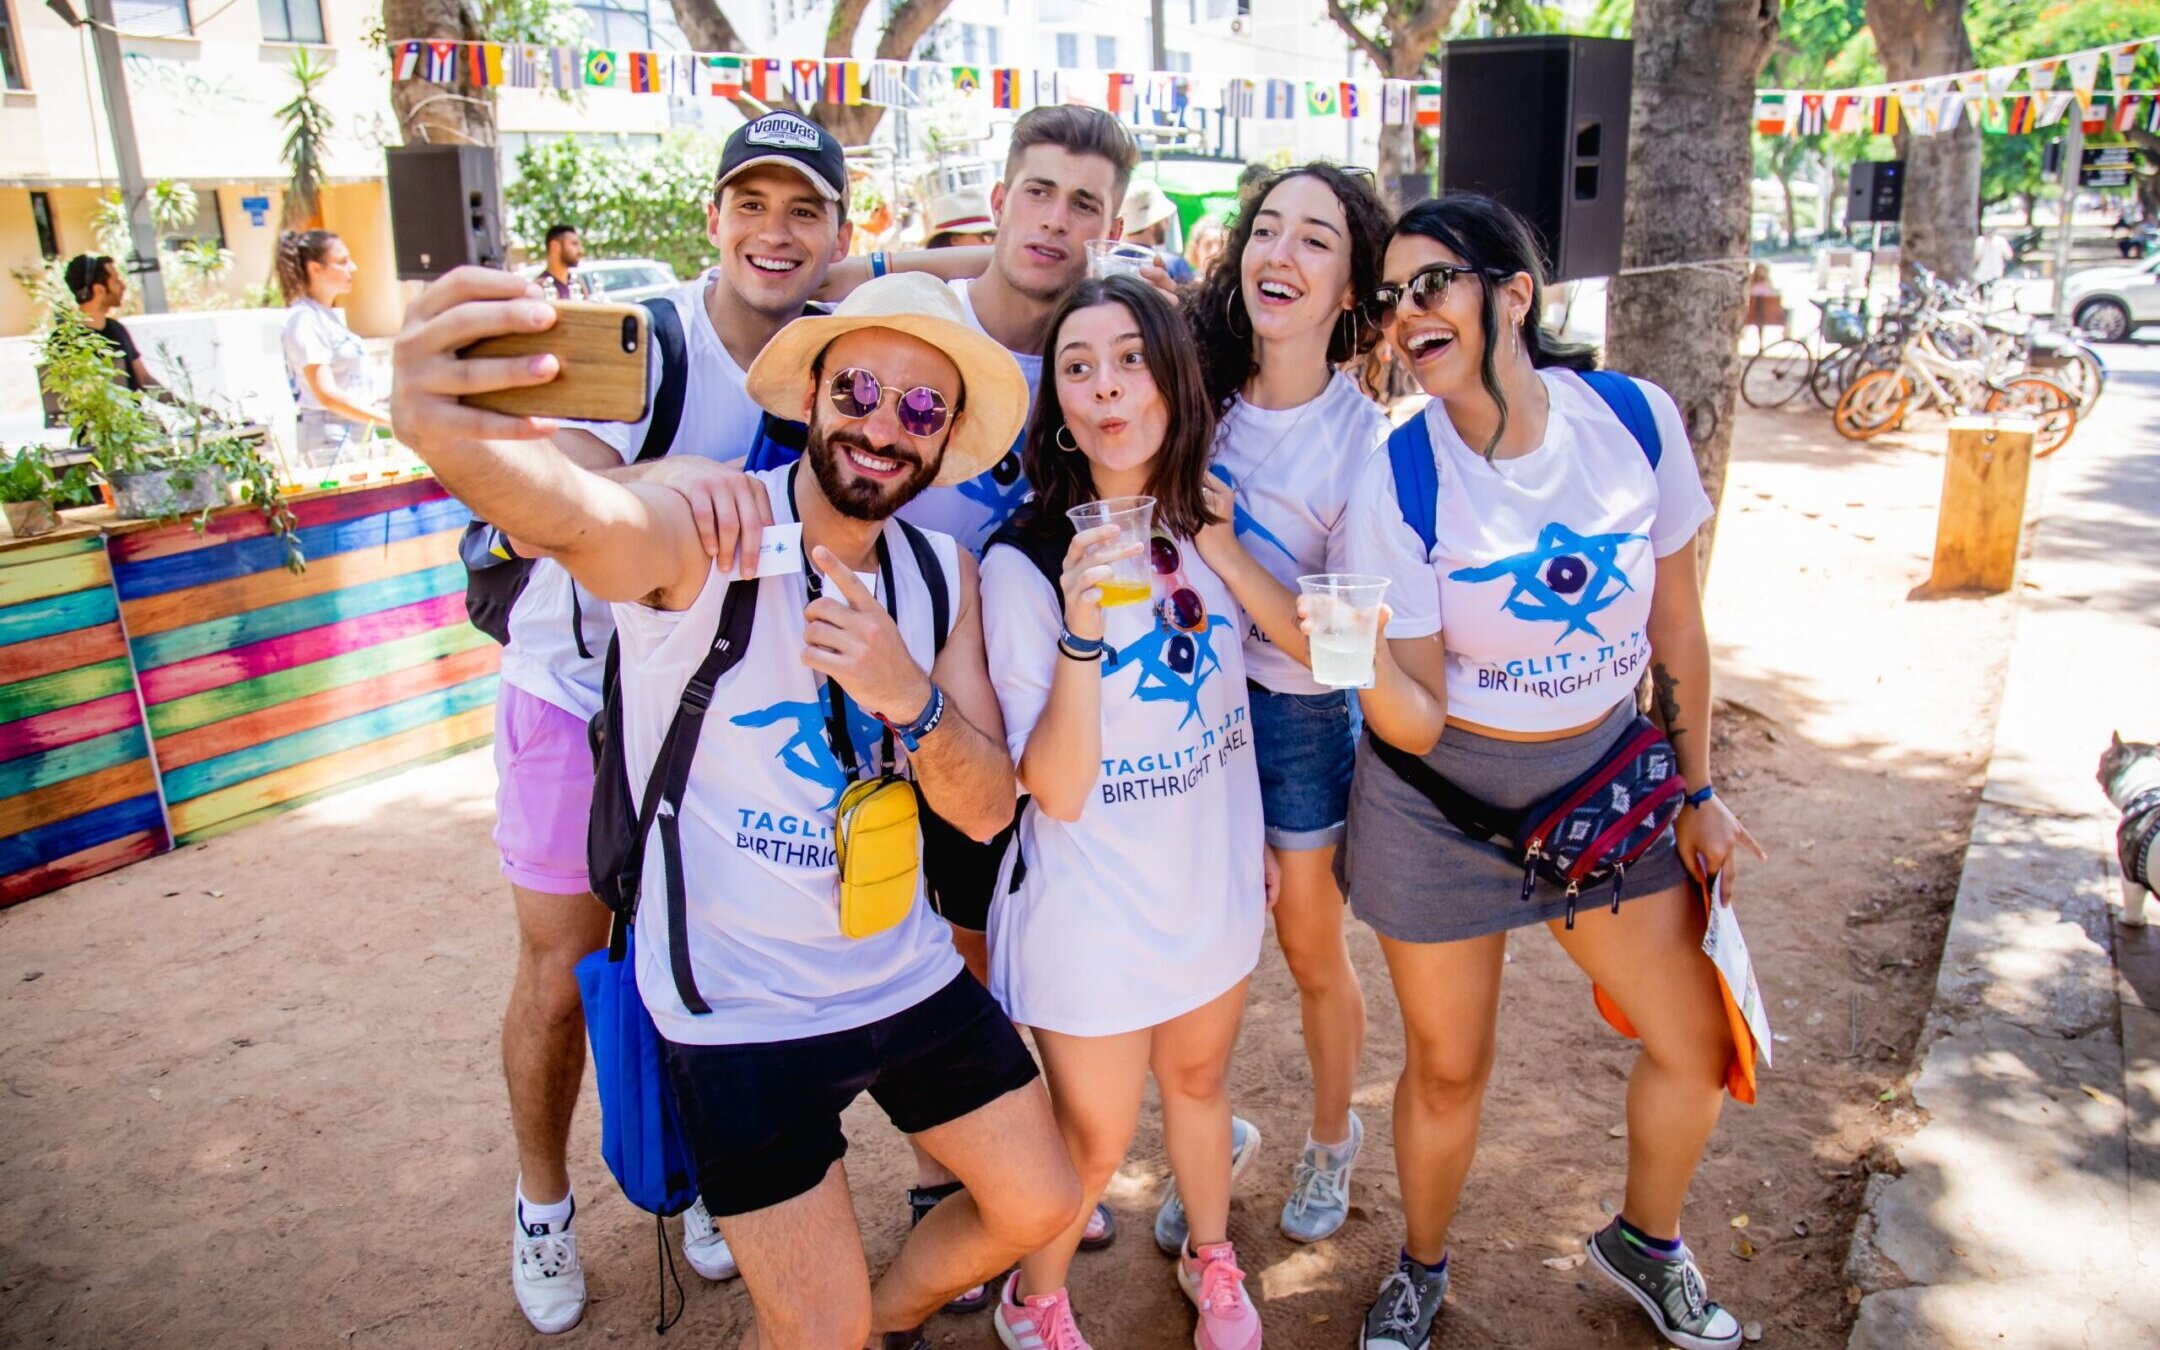 A group of Birthright Israel participants takes a selfie while touring the country on one of the group’s free trips for young adults. (Courtesy Birthright)